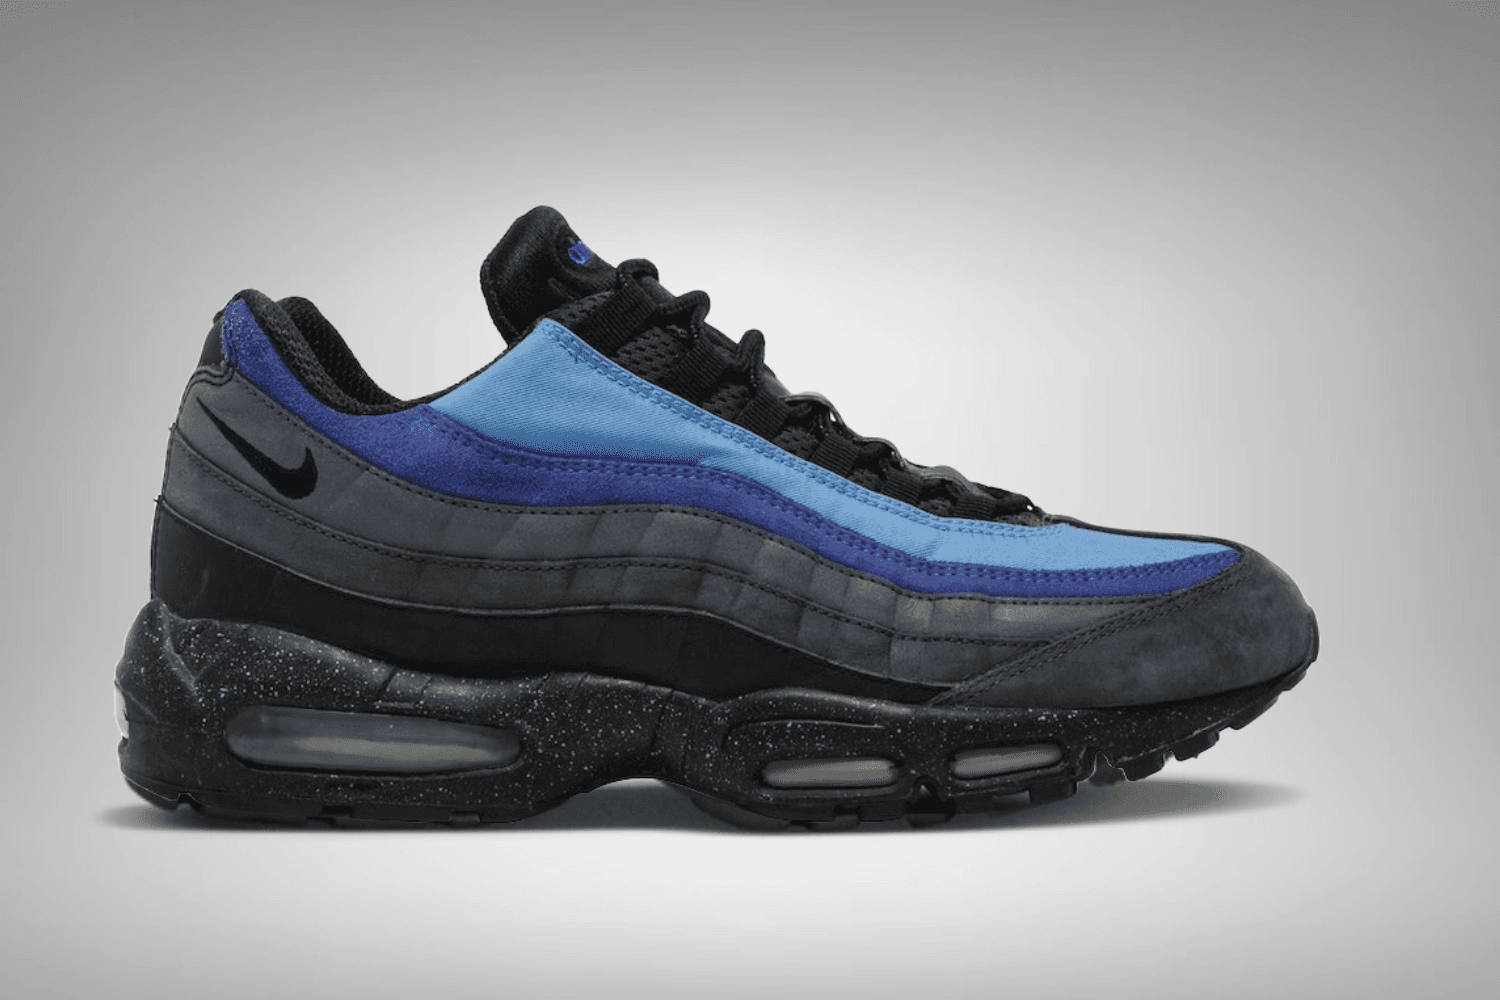 The Stash x Nike Air Max 95 will drop on Air Max Day 2025